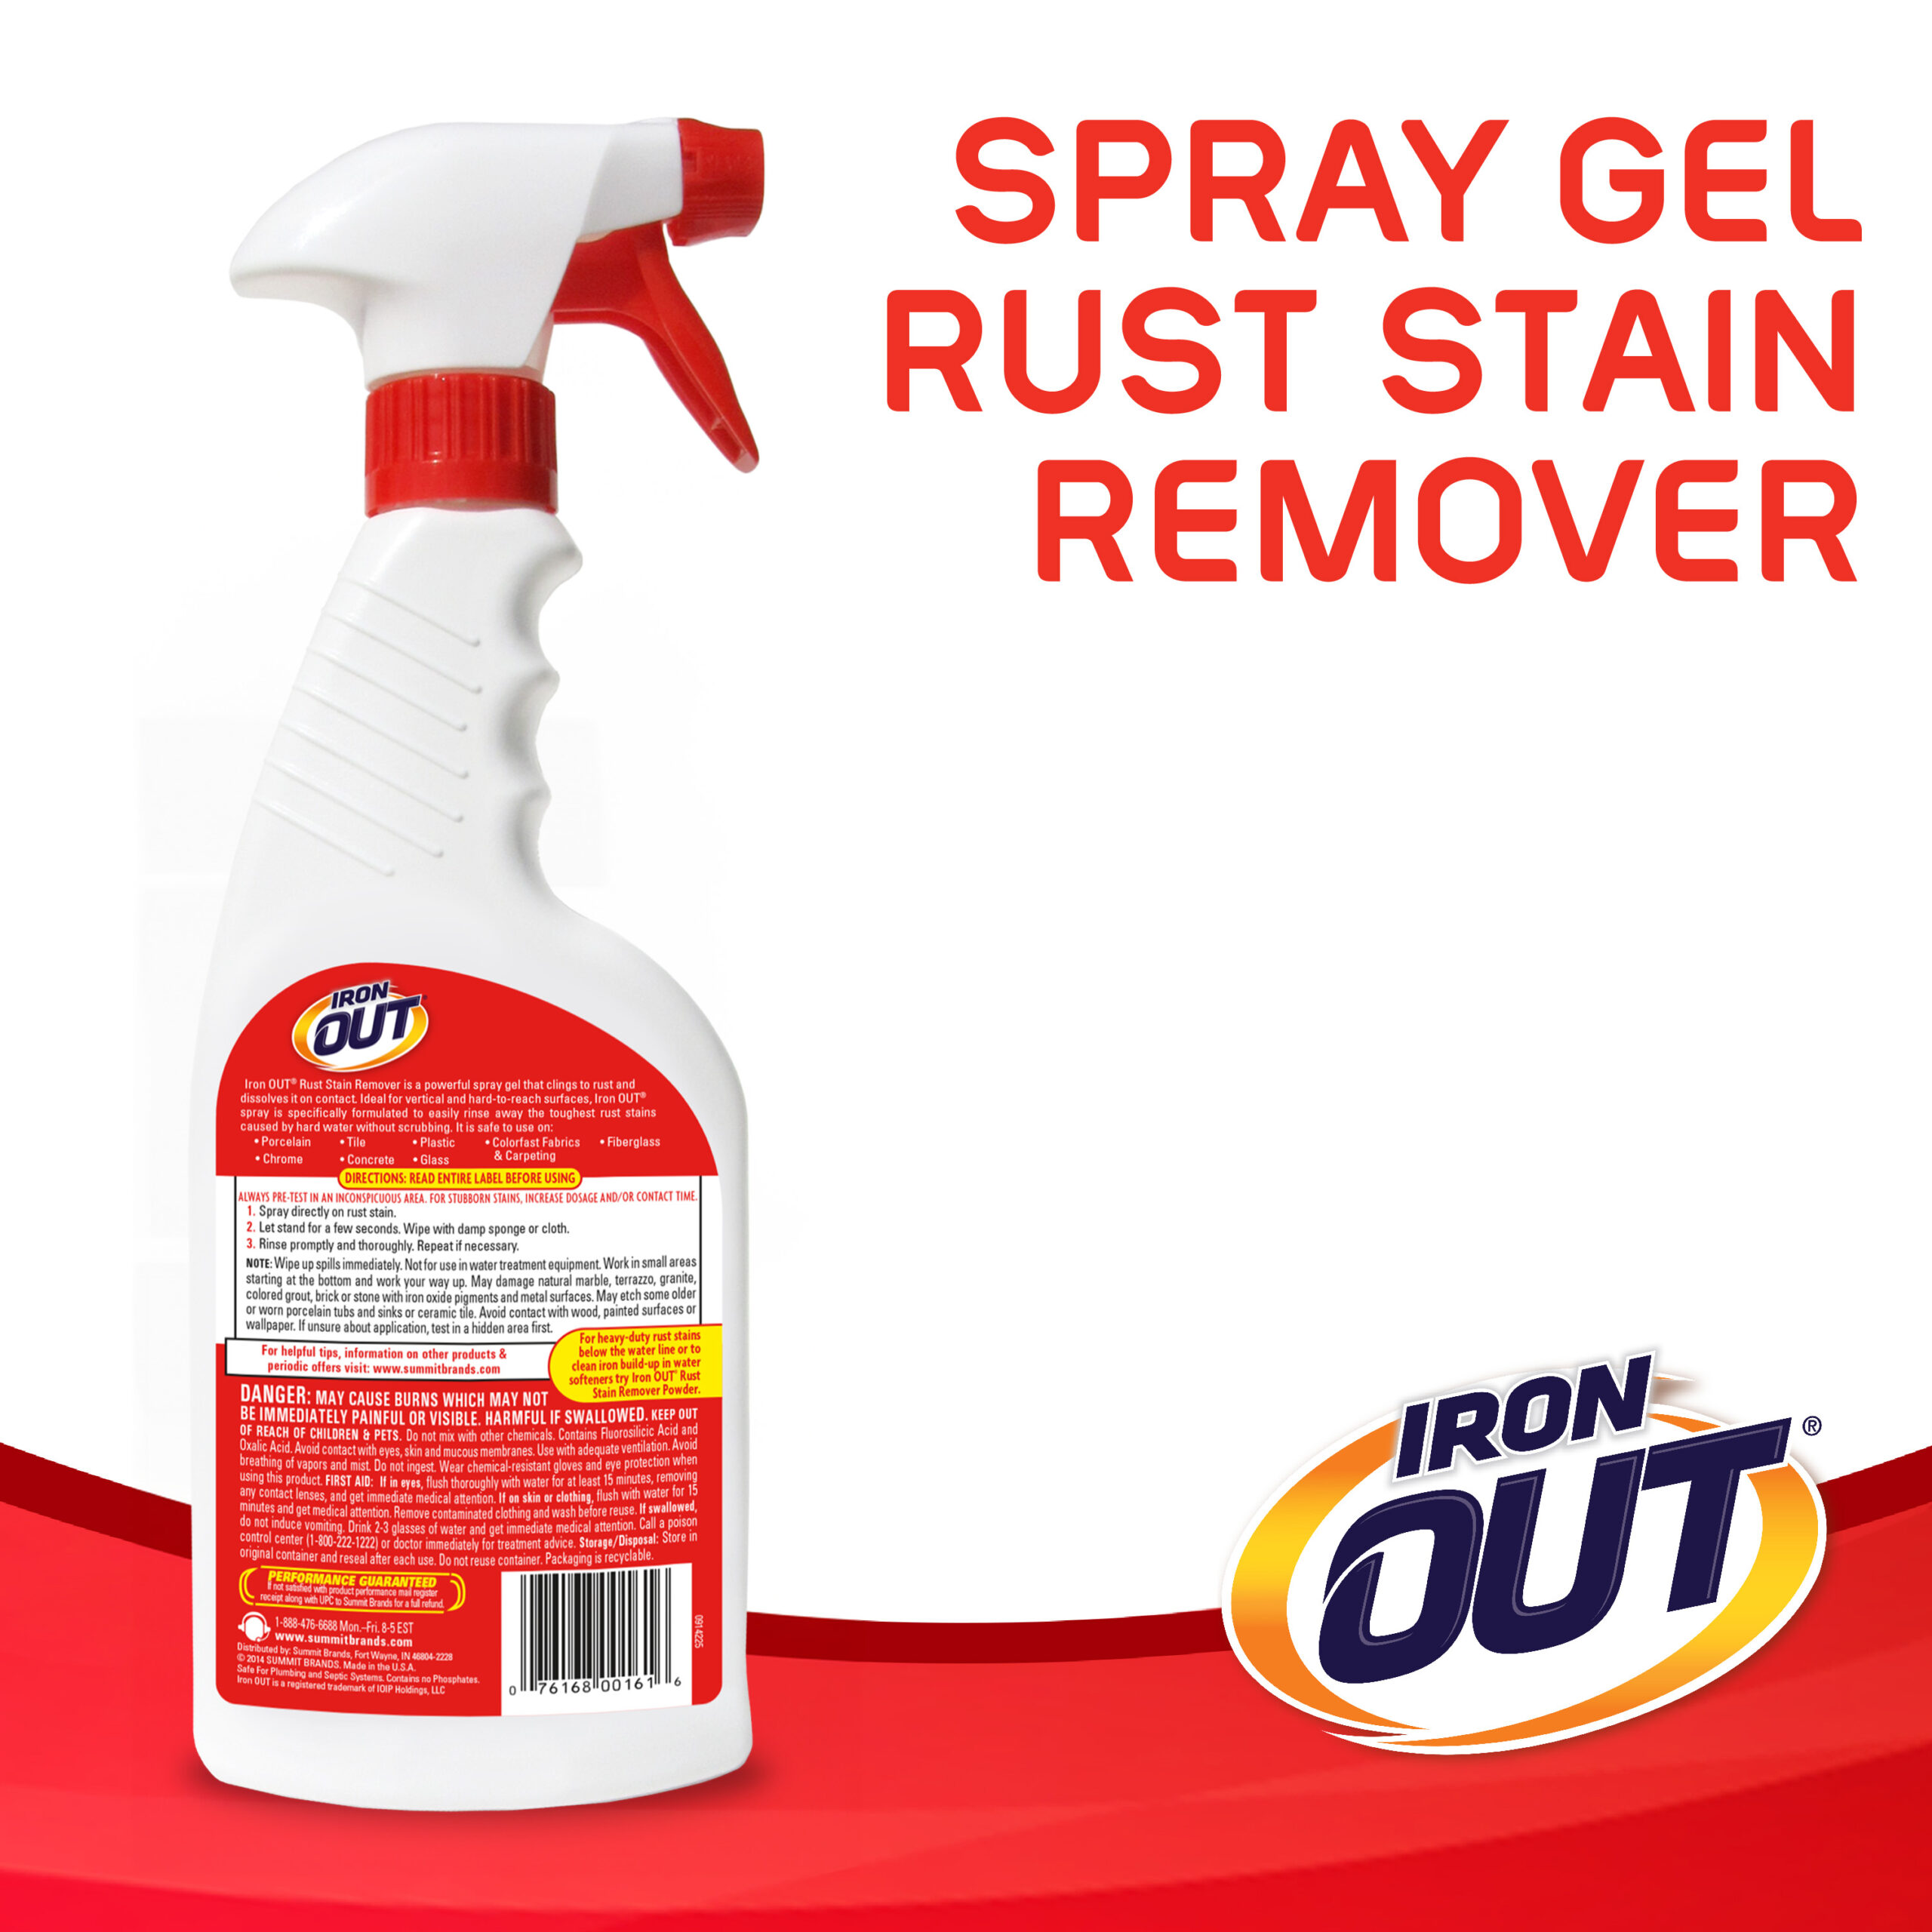 Iron or mould stain removal - How to remove rust stains